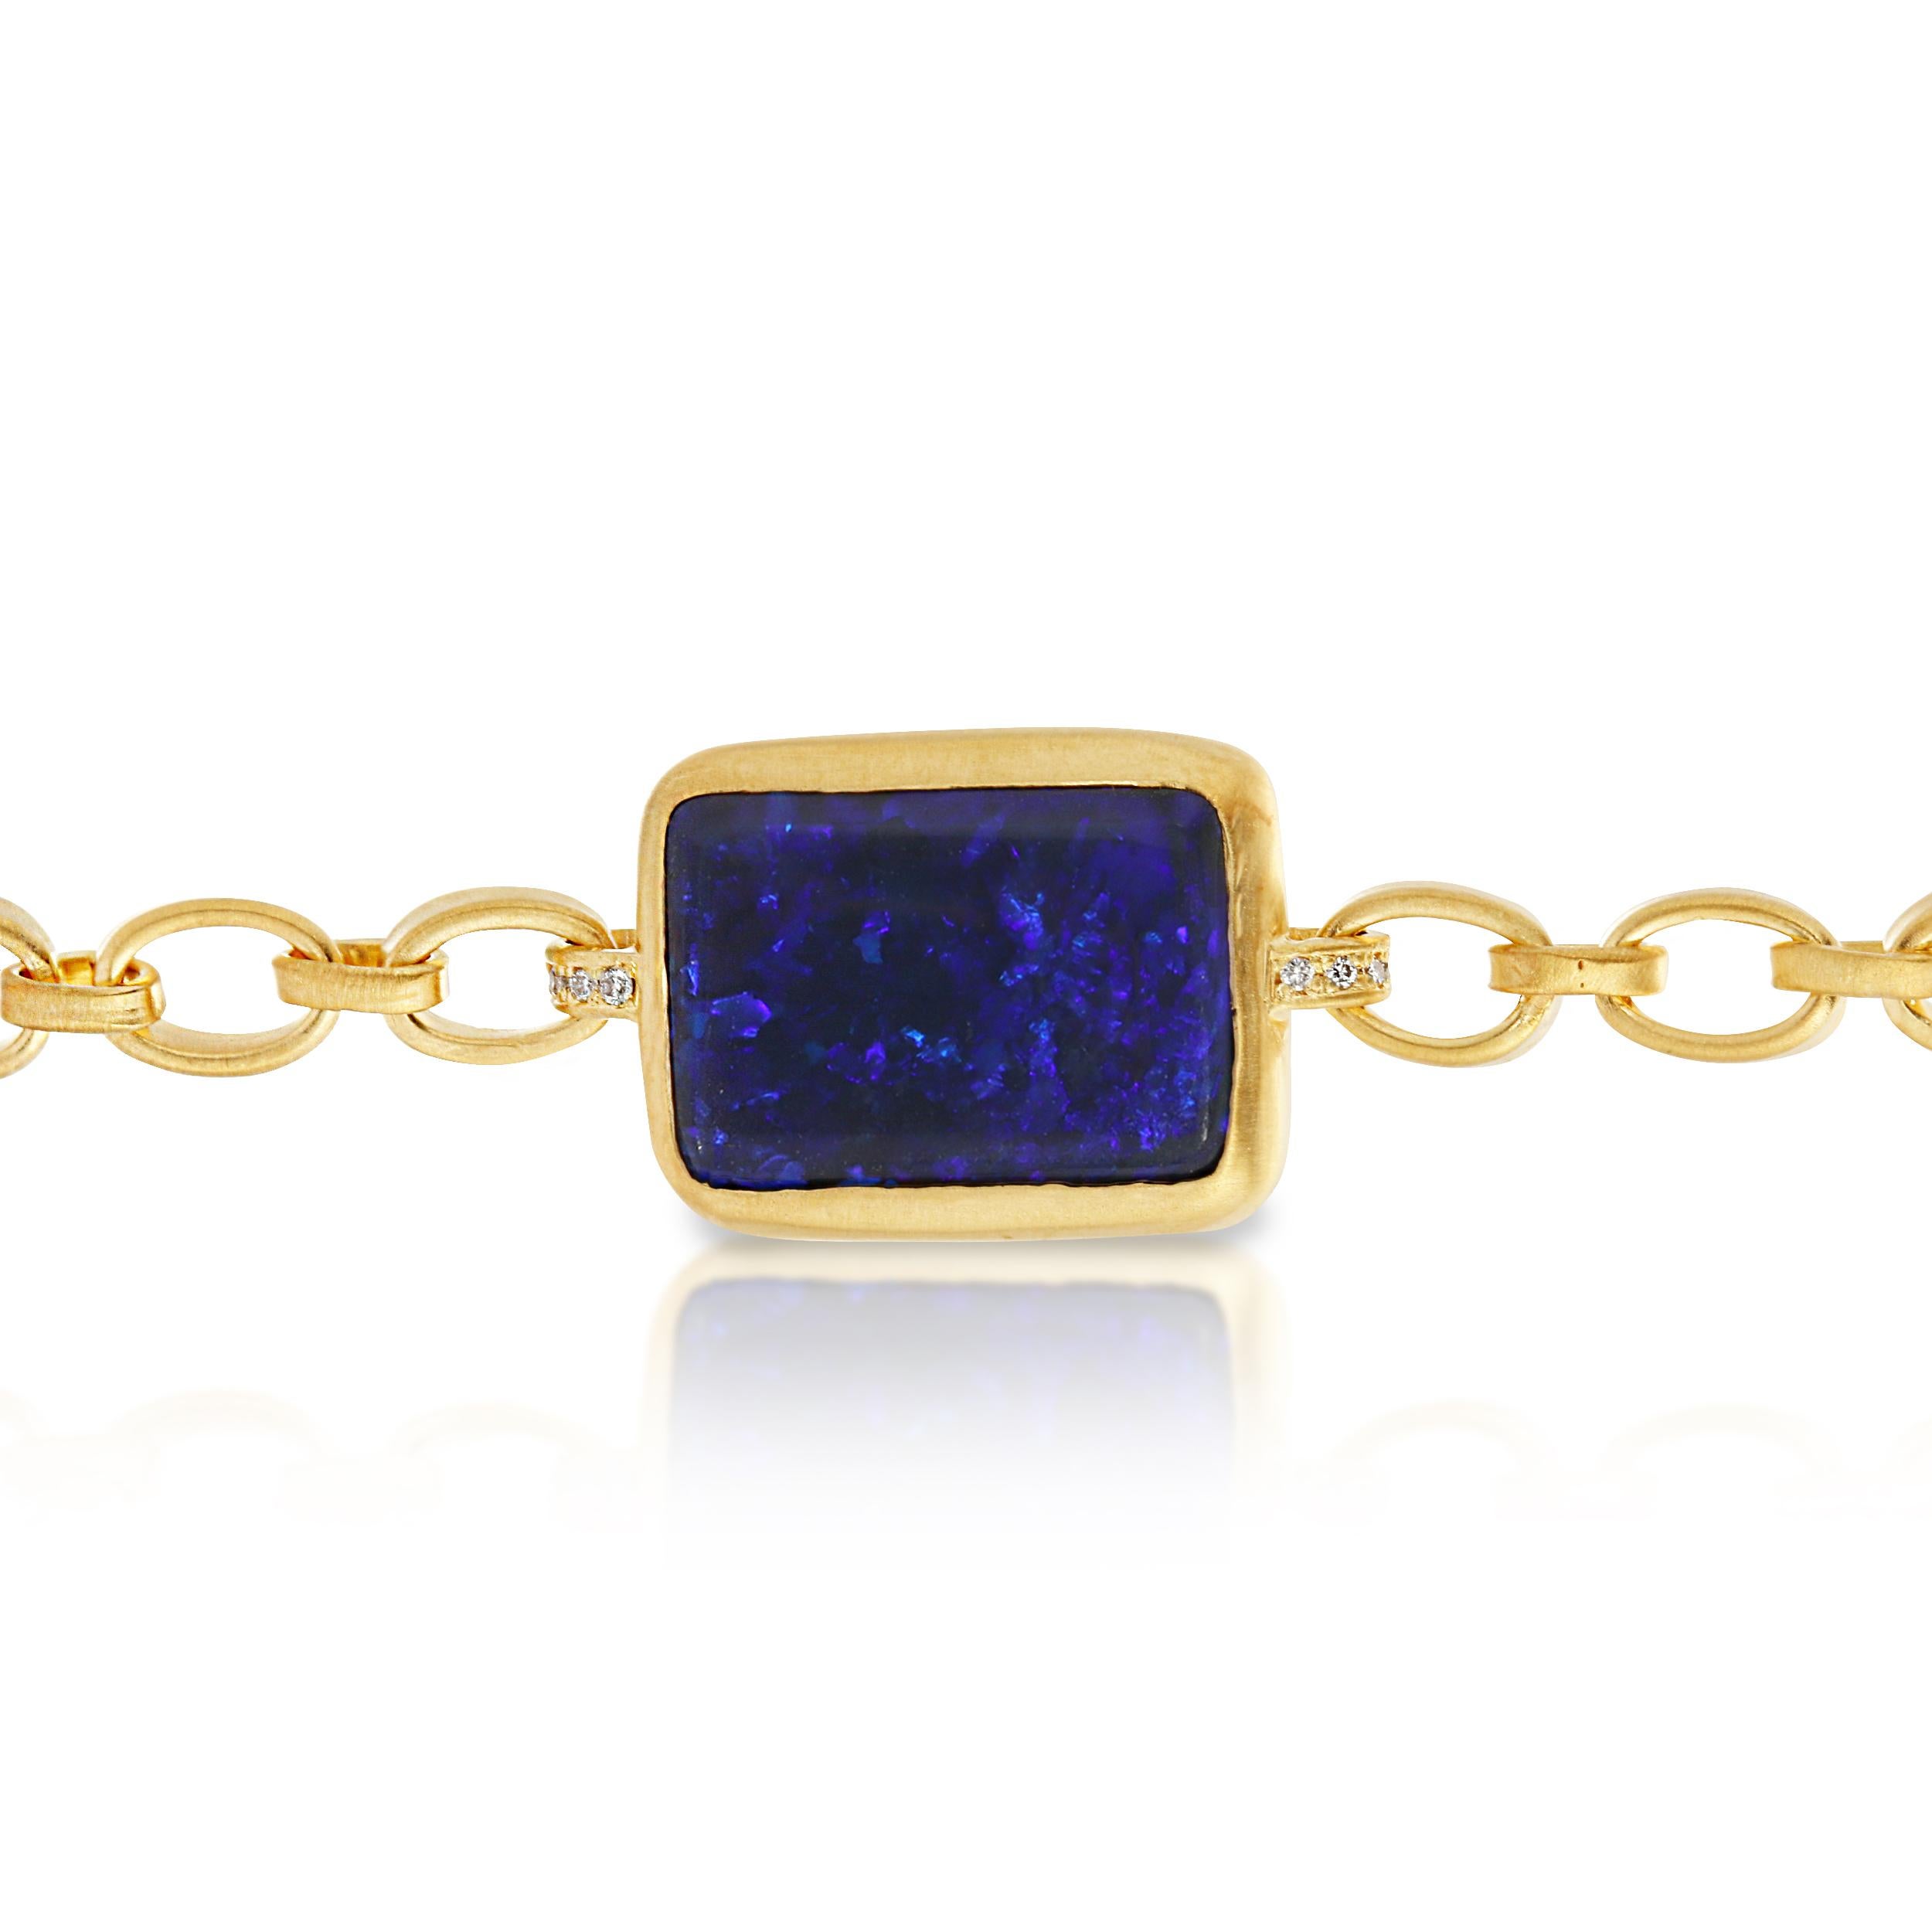 This 6.0ct  Australian Black Opal is Bezel Set in Matte 18k Yellow Gold with .10ct Diamond Accent on the loops connecting the Opal to the Completely Handmade Chain and flower detail on the back. The bracelet has a Handmade Toggle Closure with